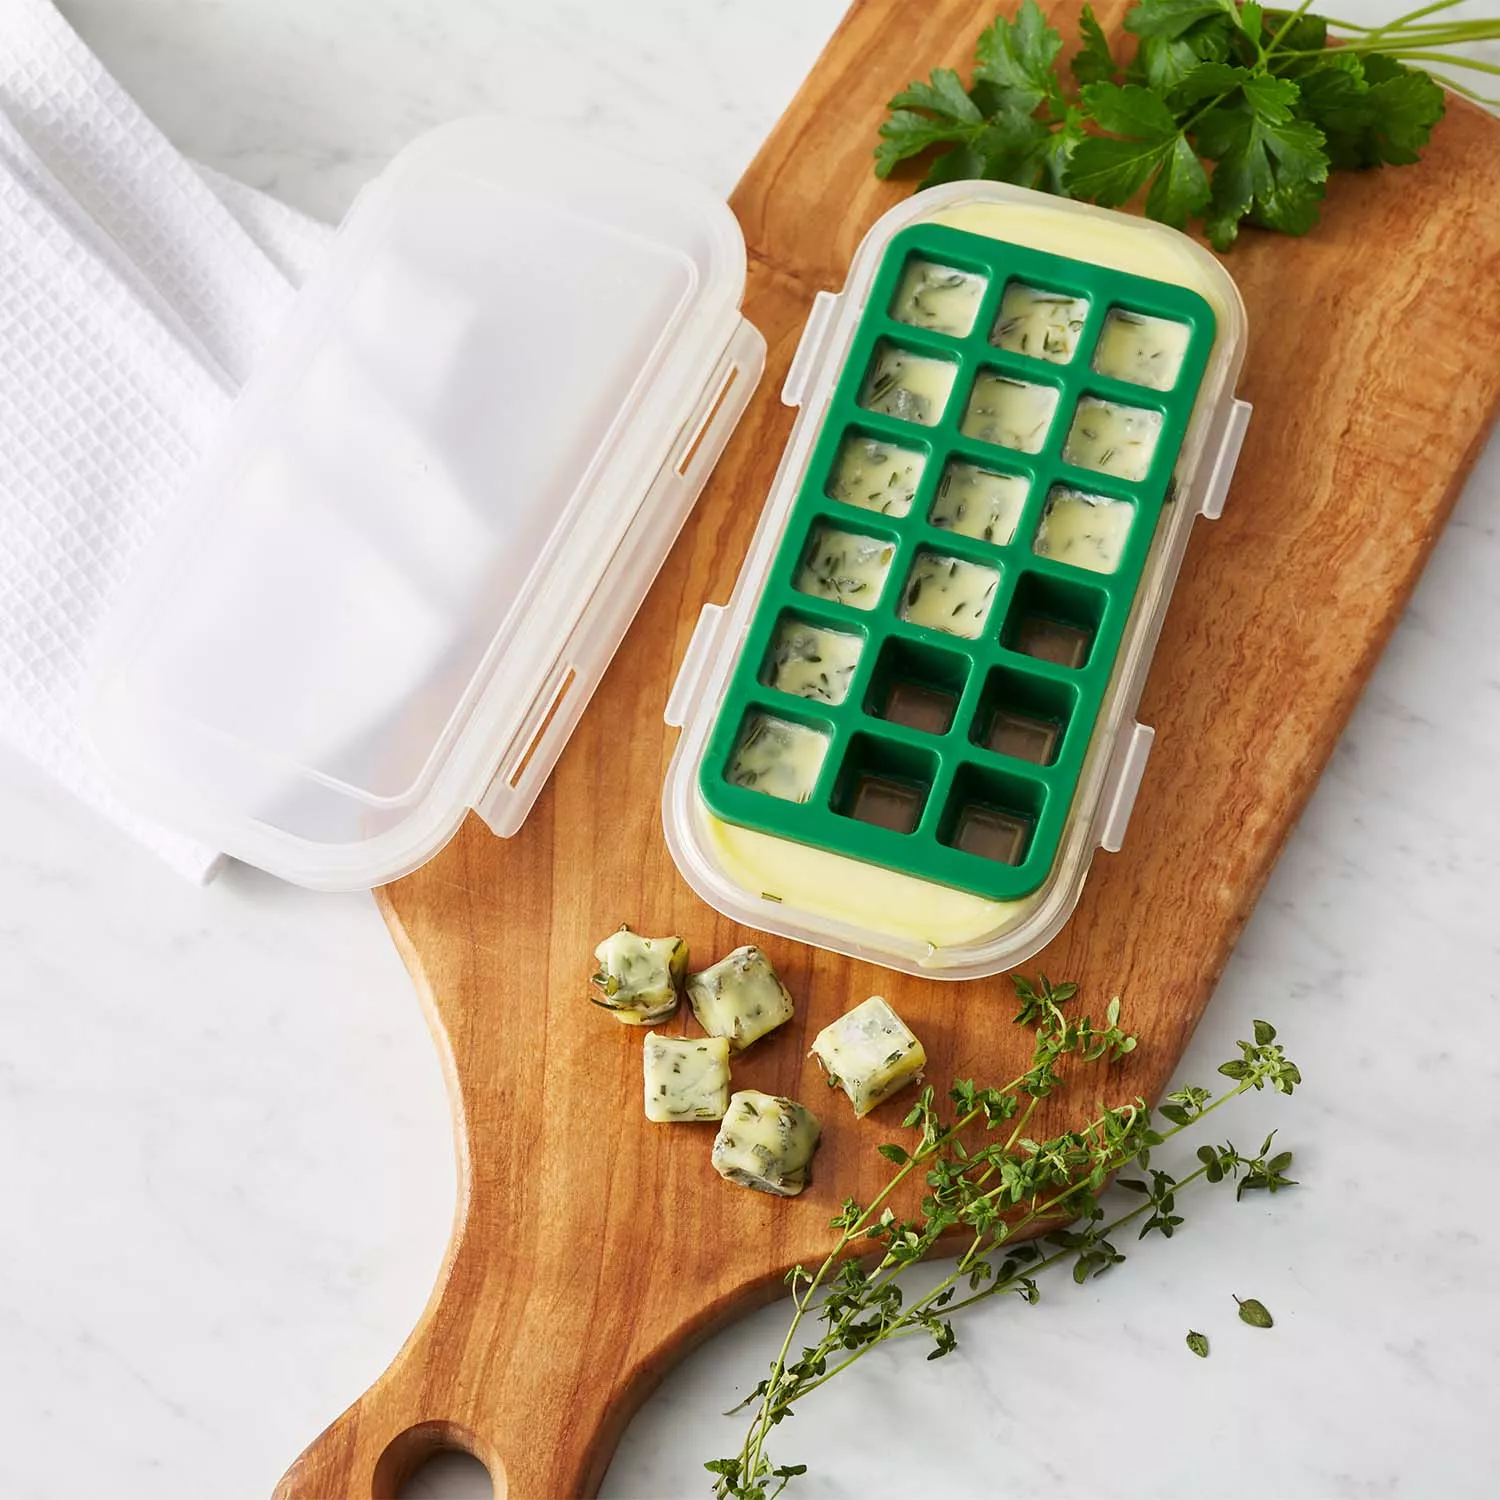 LEVO Herb Block Tray - Silicone Herb Freezer Tray with Lid - Herb Saver for  Homemade Infusions - Silicone Freezer Tray for LEVO I & LEVO II Infusions